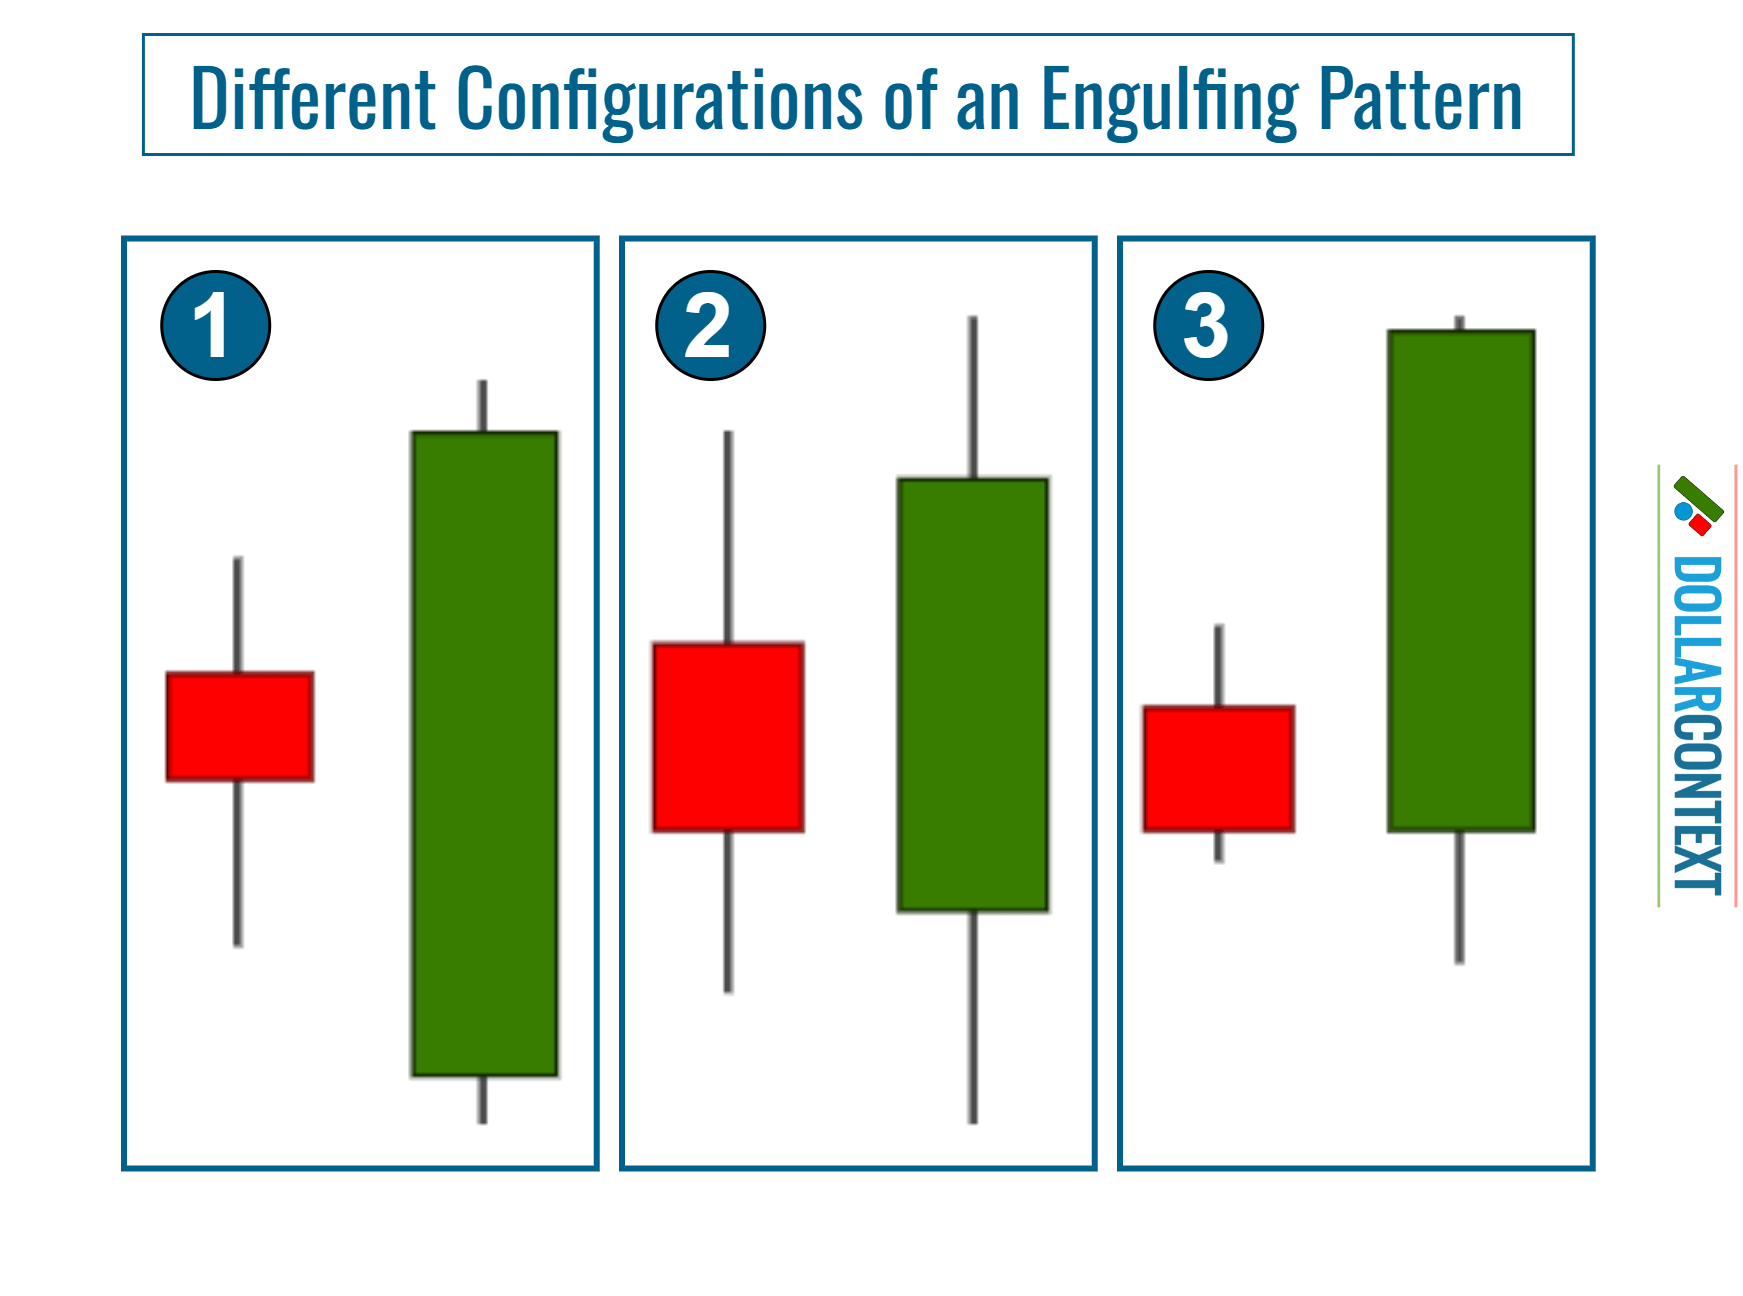 Different Variations of an Engulfing Pattern